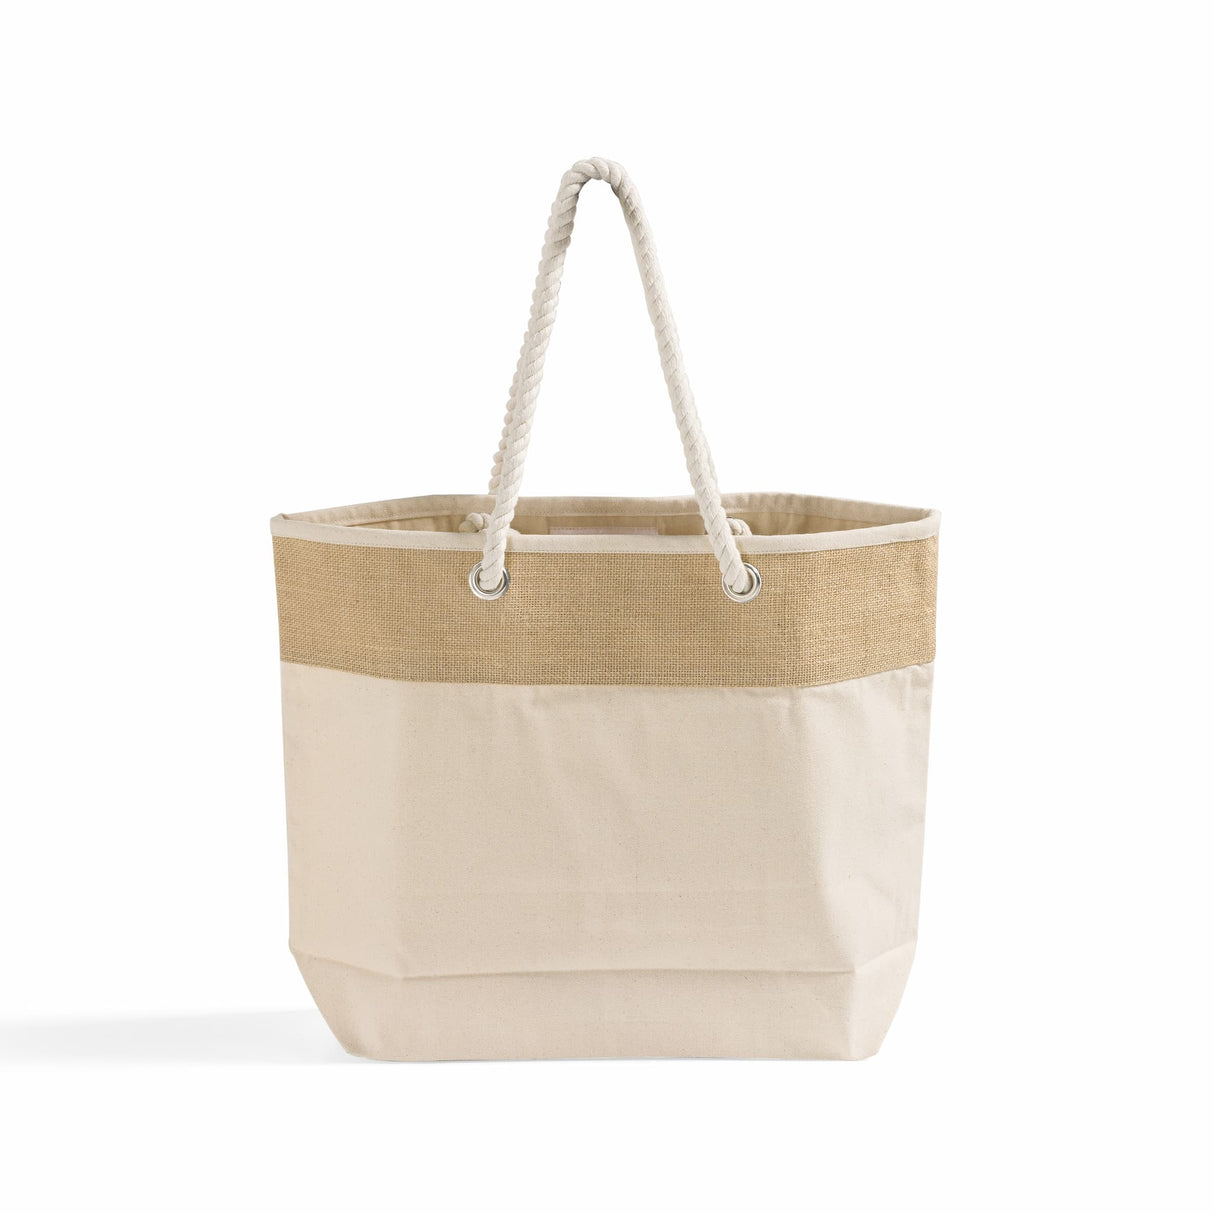 48 ct Large Fancy Canvas Rope Tote Bag - By Case